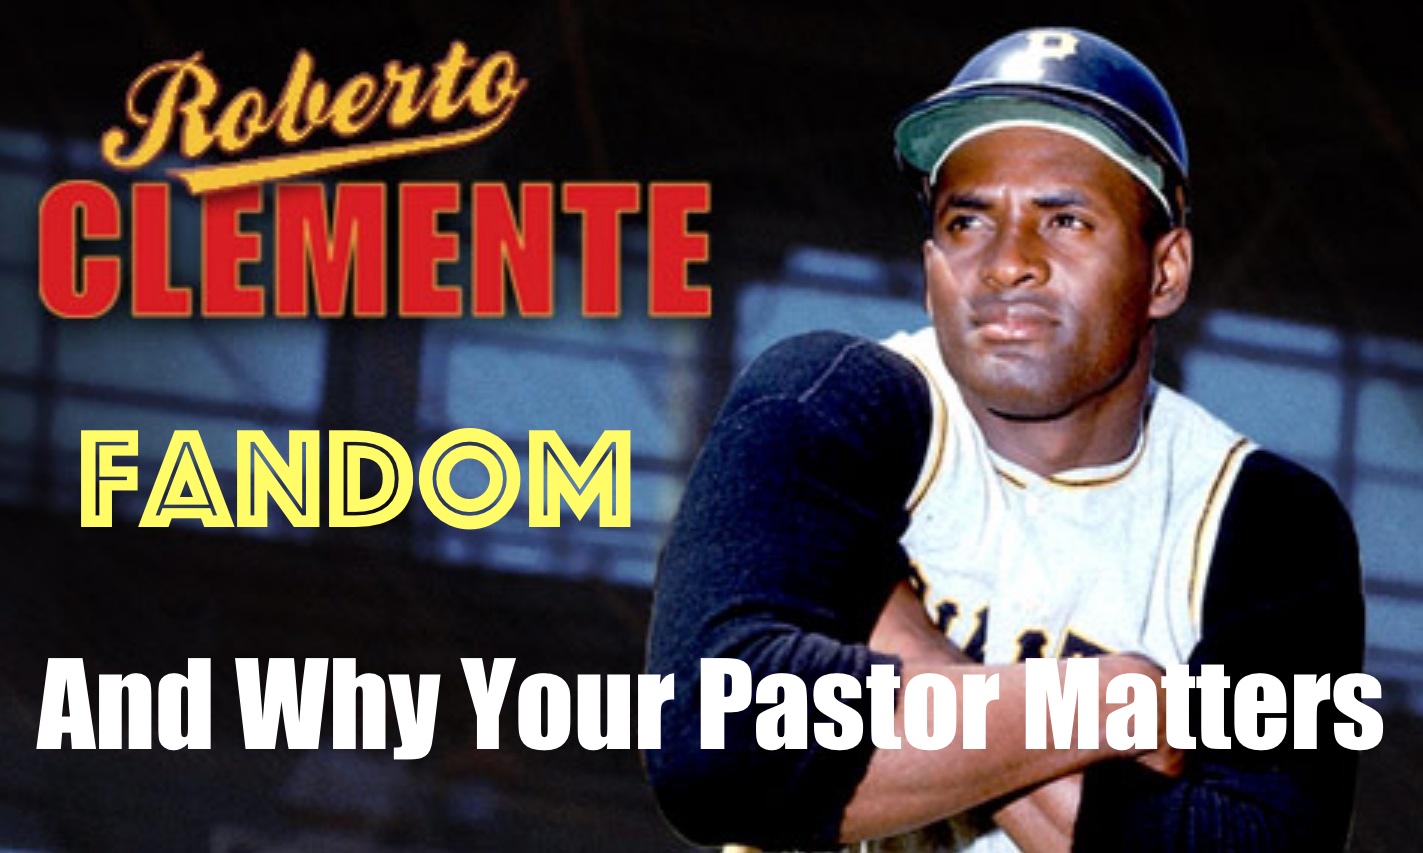 Roberto Clemente, Fandom, and Why Your Pastor Matters